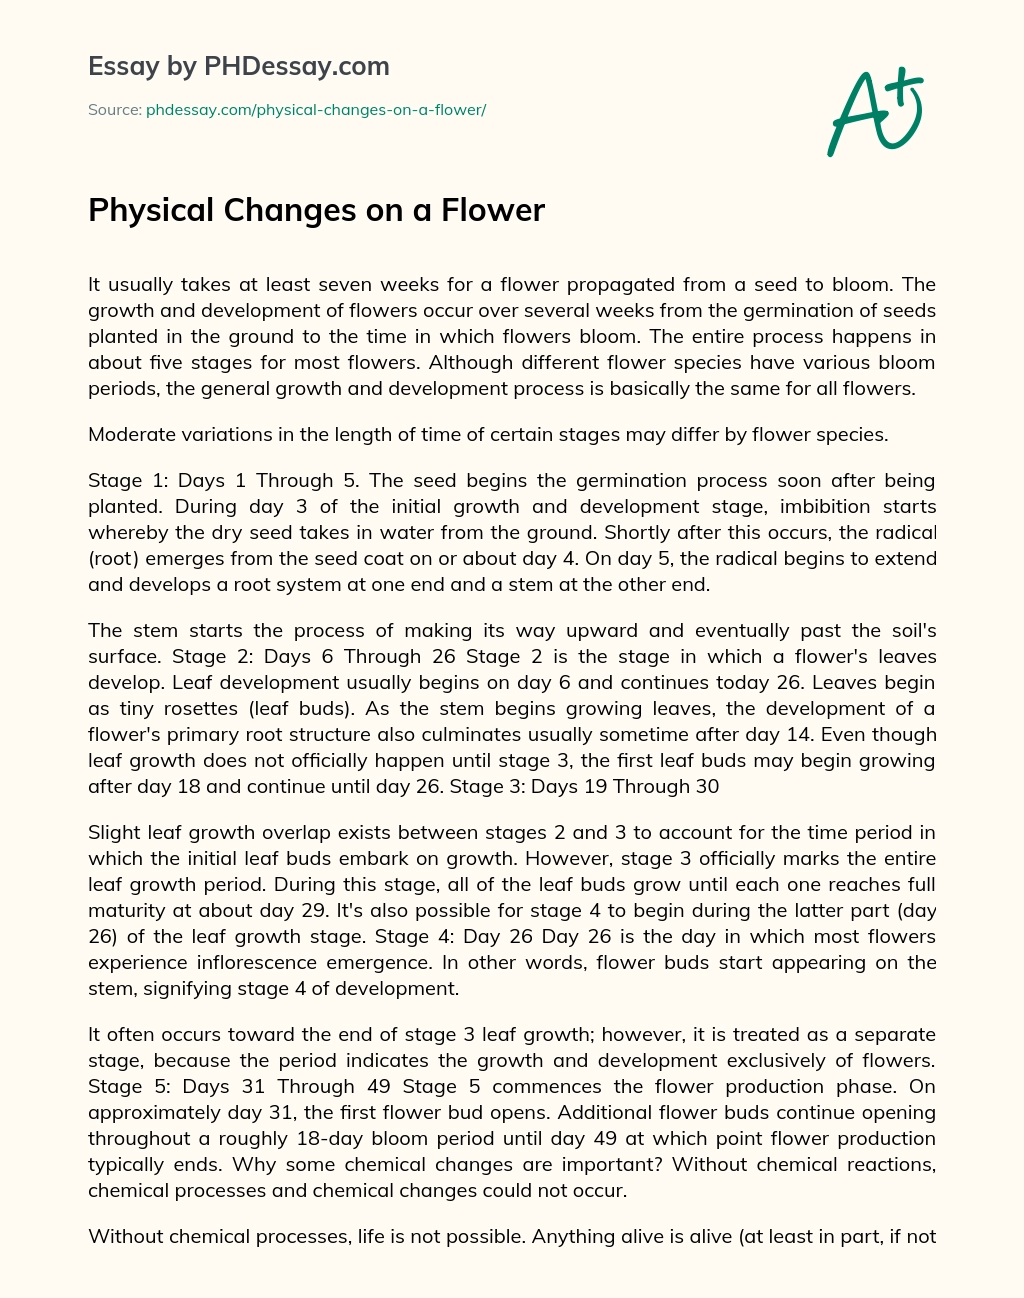 Physical Changes on a Flower essay